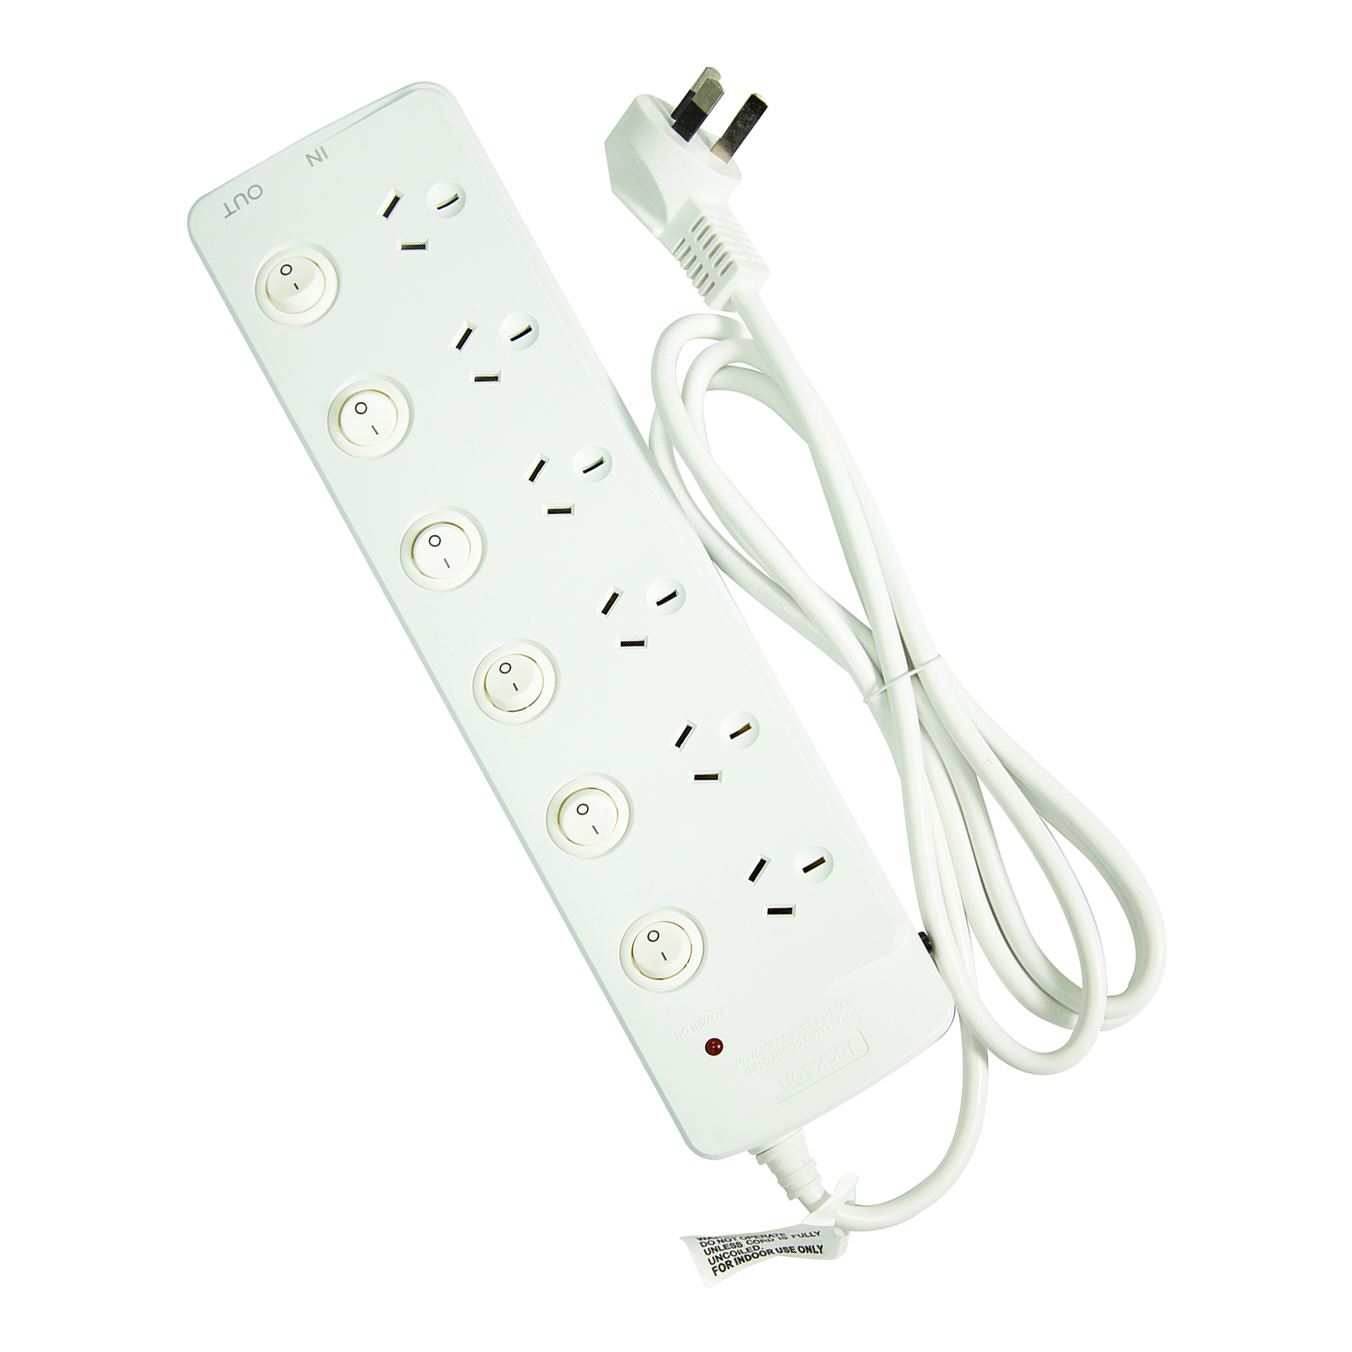 6-Way Individually Switched Protected Power Board with Telephone Protection, 2m power cord.